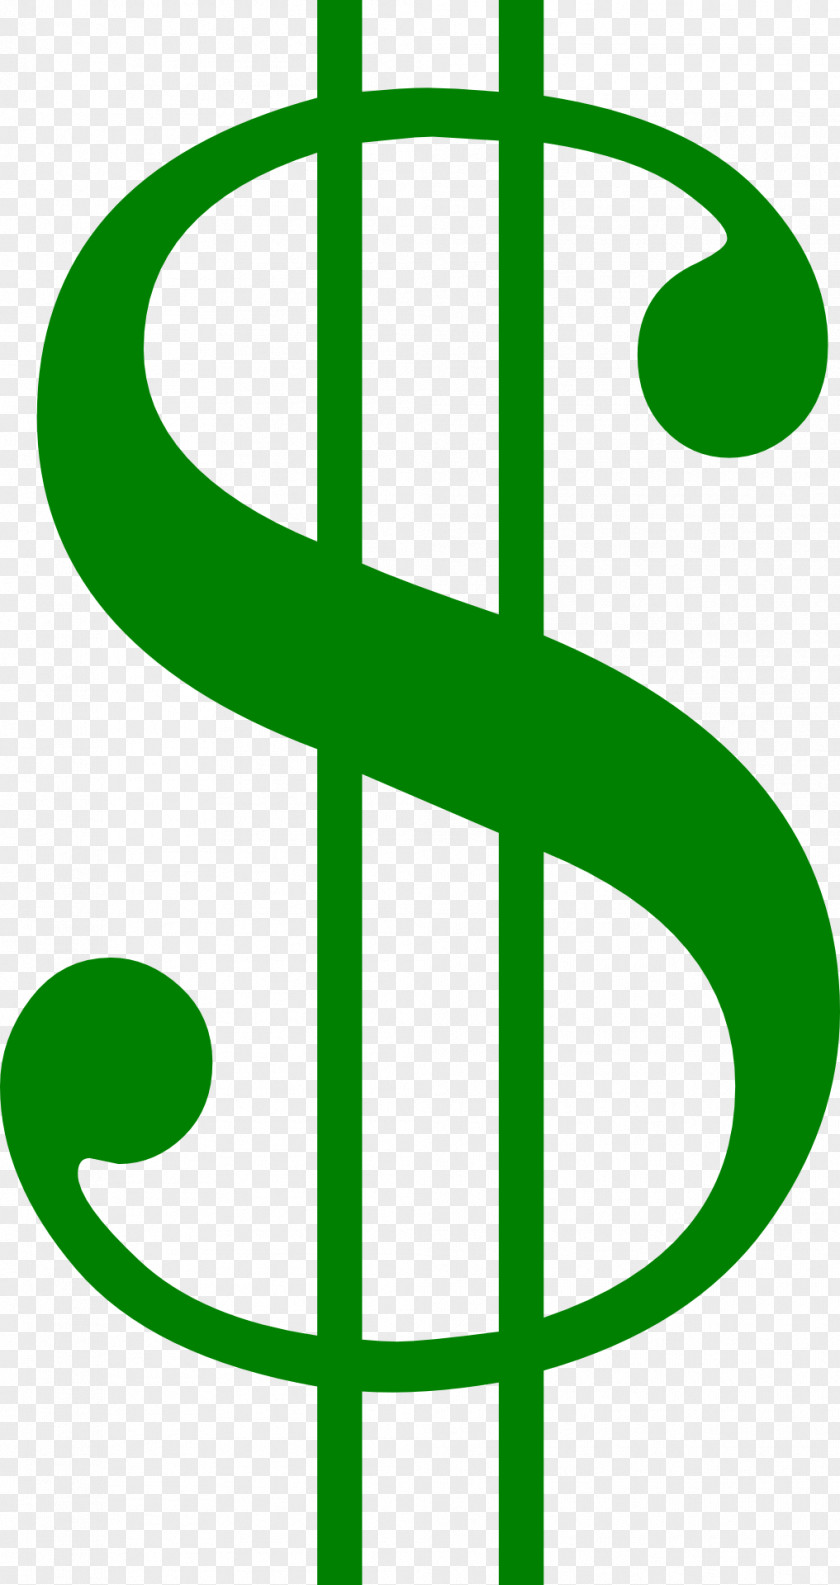 Dollar Sign United States Currency Symbol Clip Art PNG